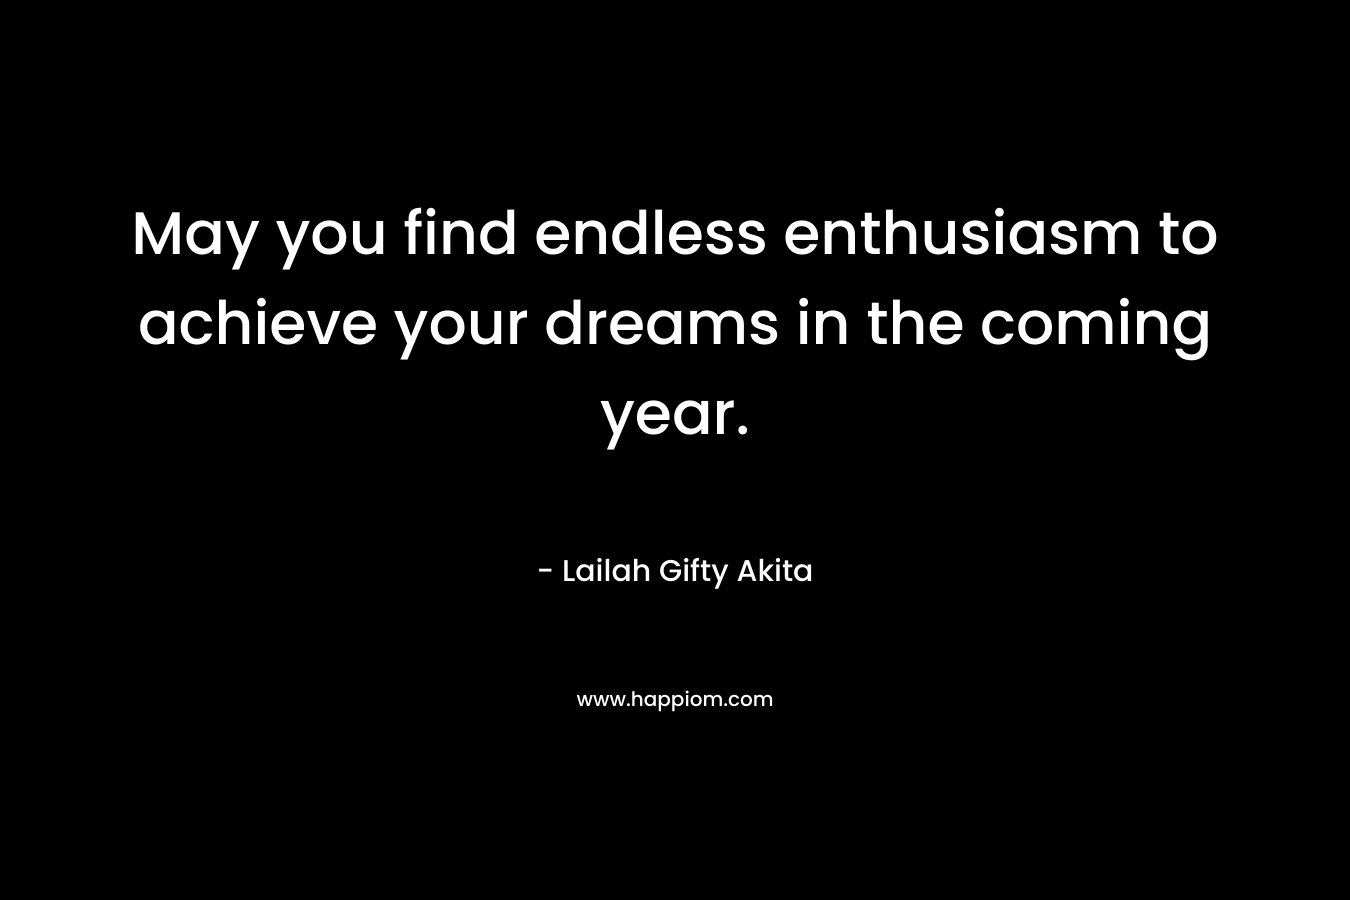 May you find endless enthusiasm to achieve your dreams in the coming year.